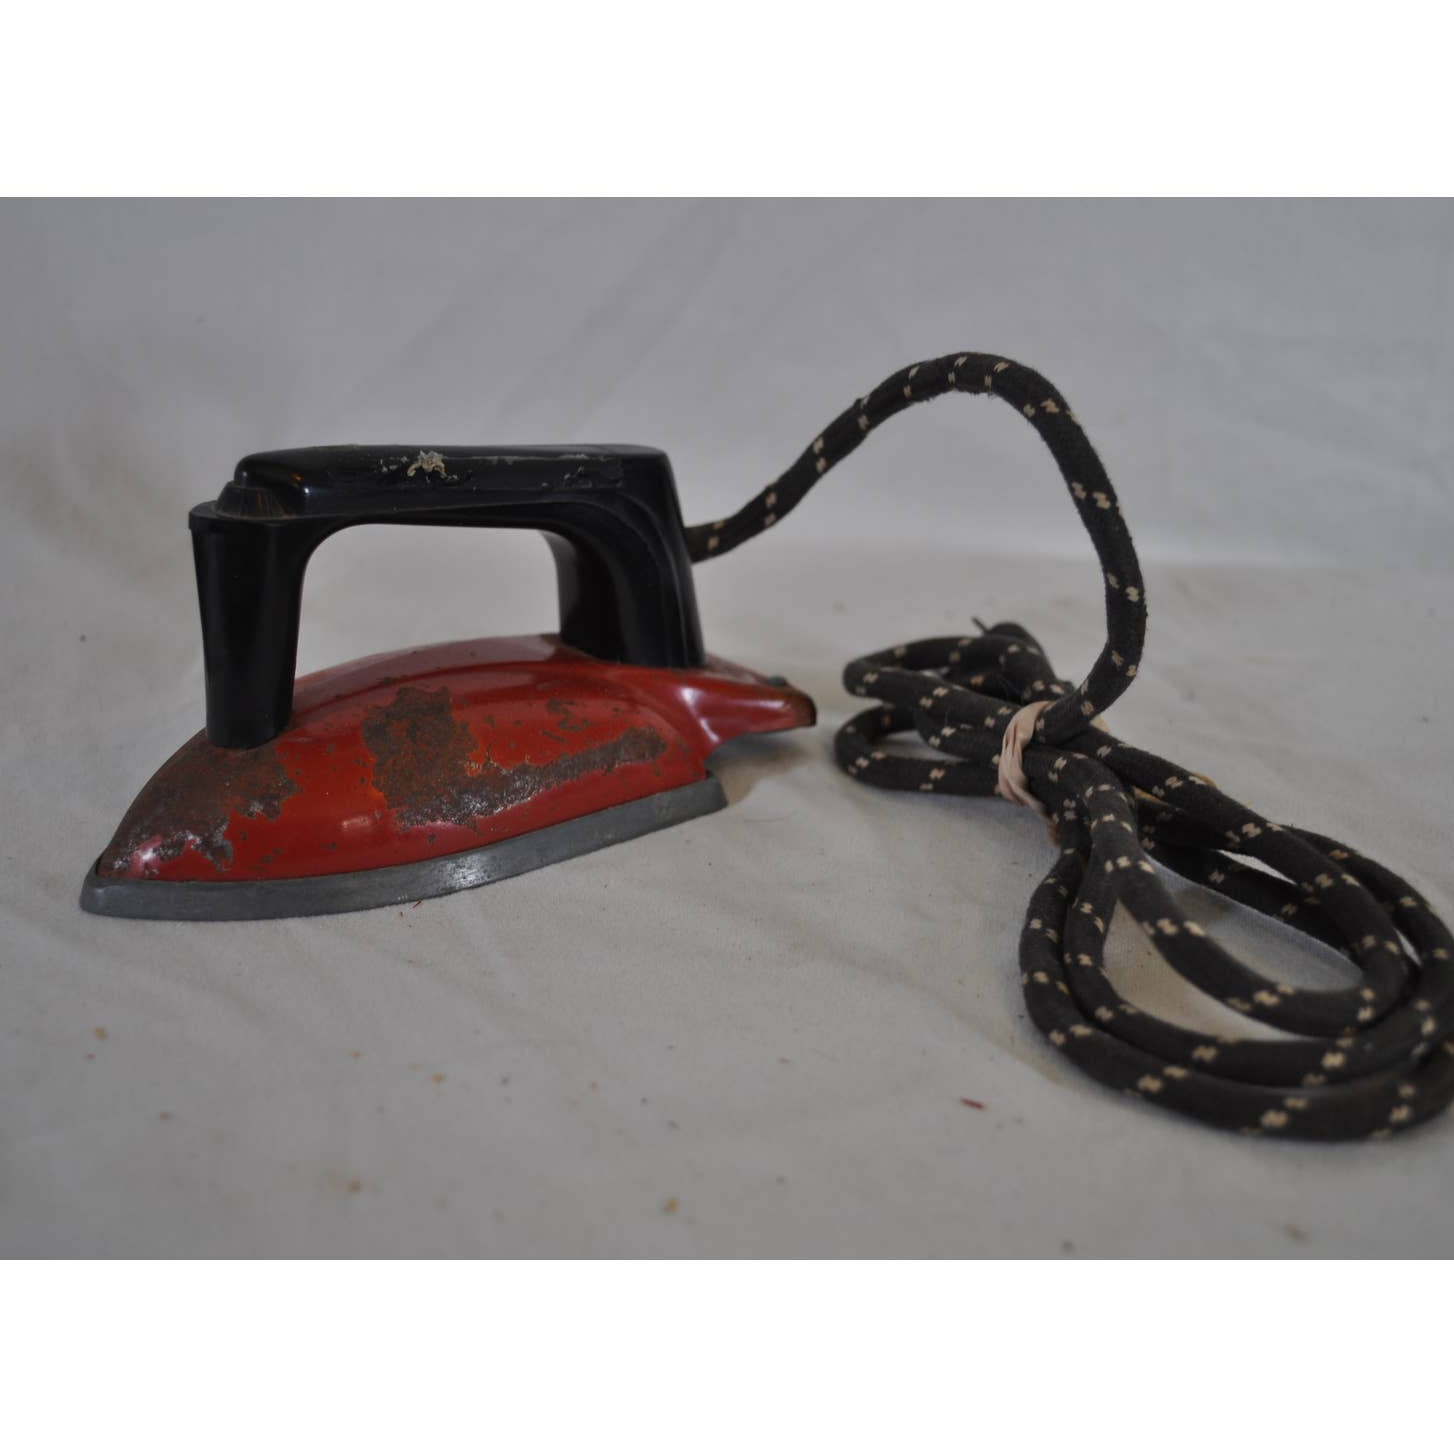 VTG Children\'s Electric Iron by Sunny Suzy